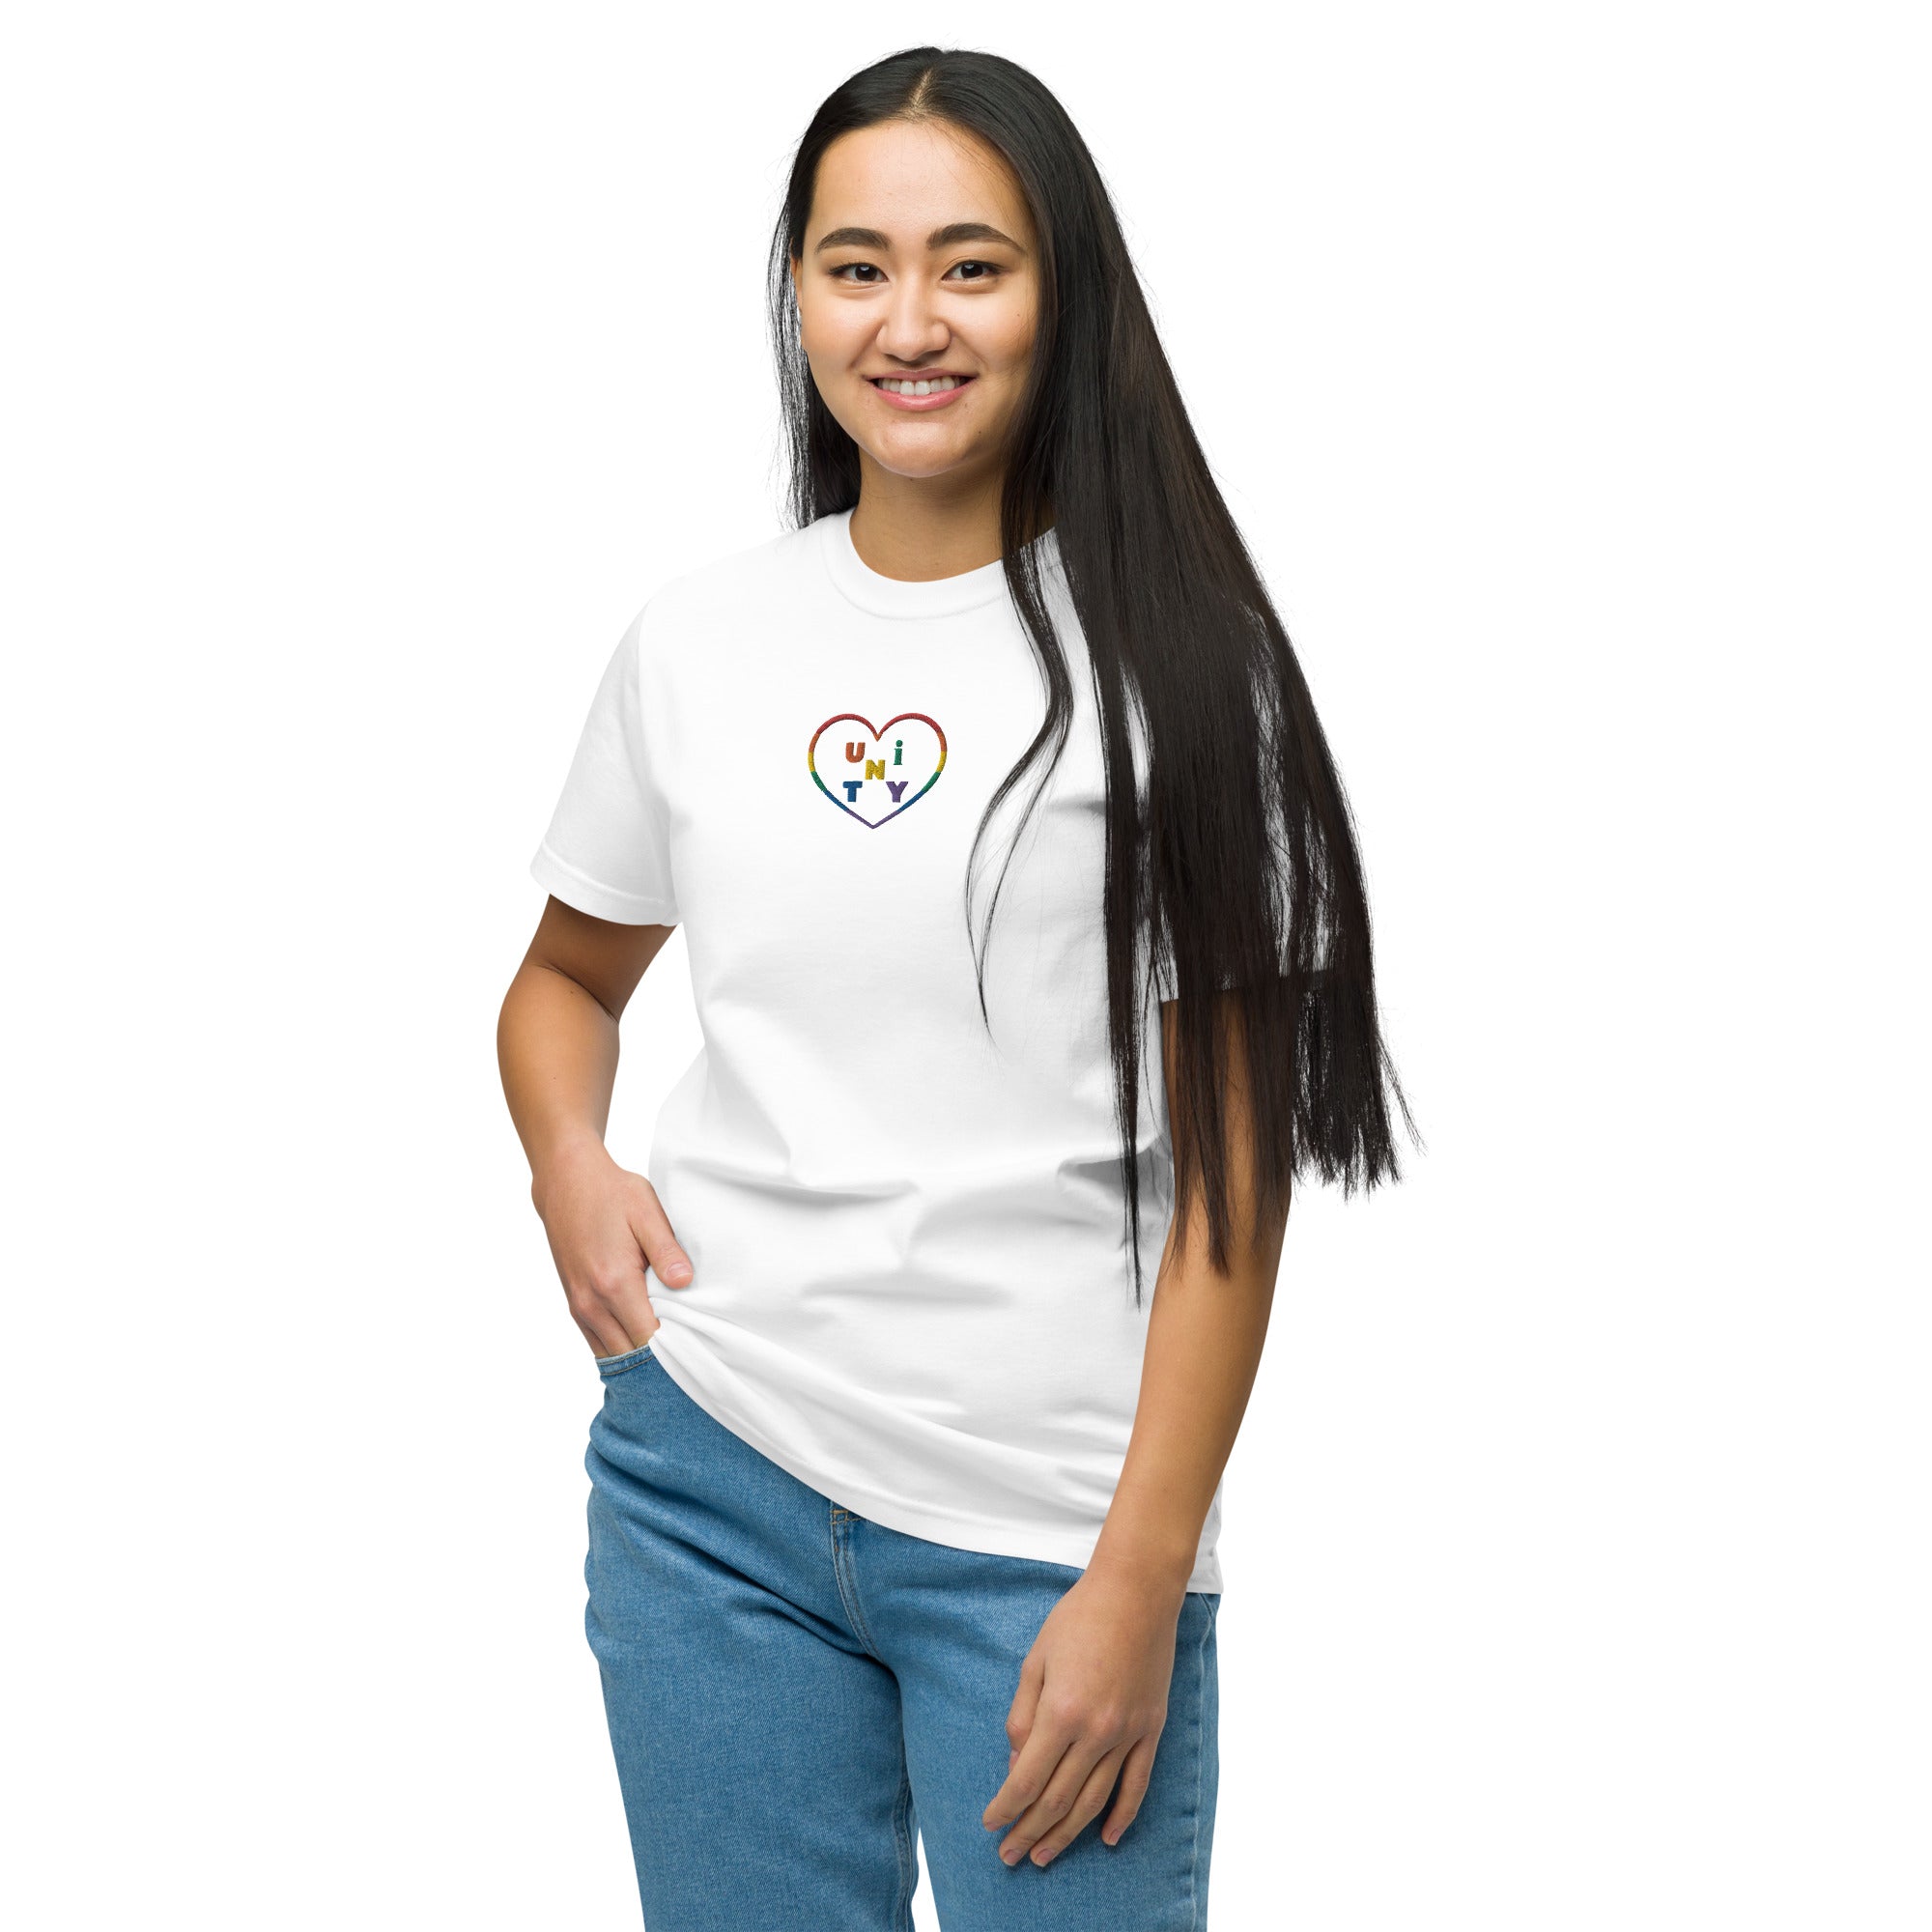 Gay Pride Unity Certified Organic Cotton Unisex Embroidered T-Shirt